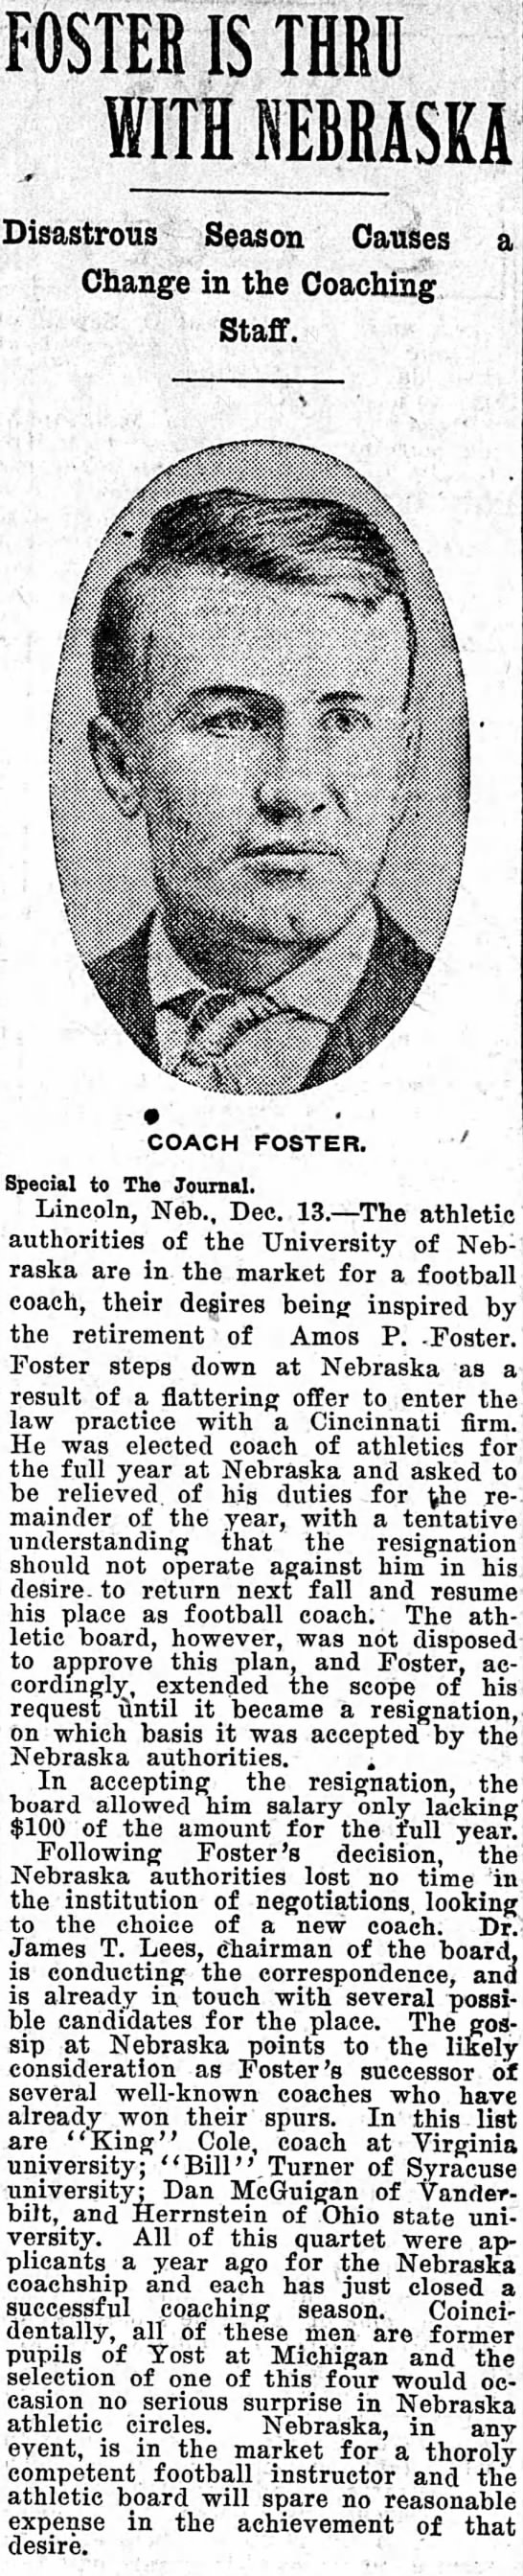 1906 Amos Foster resigns - 